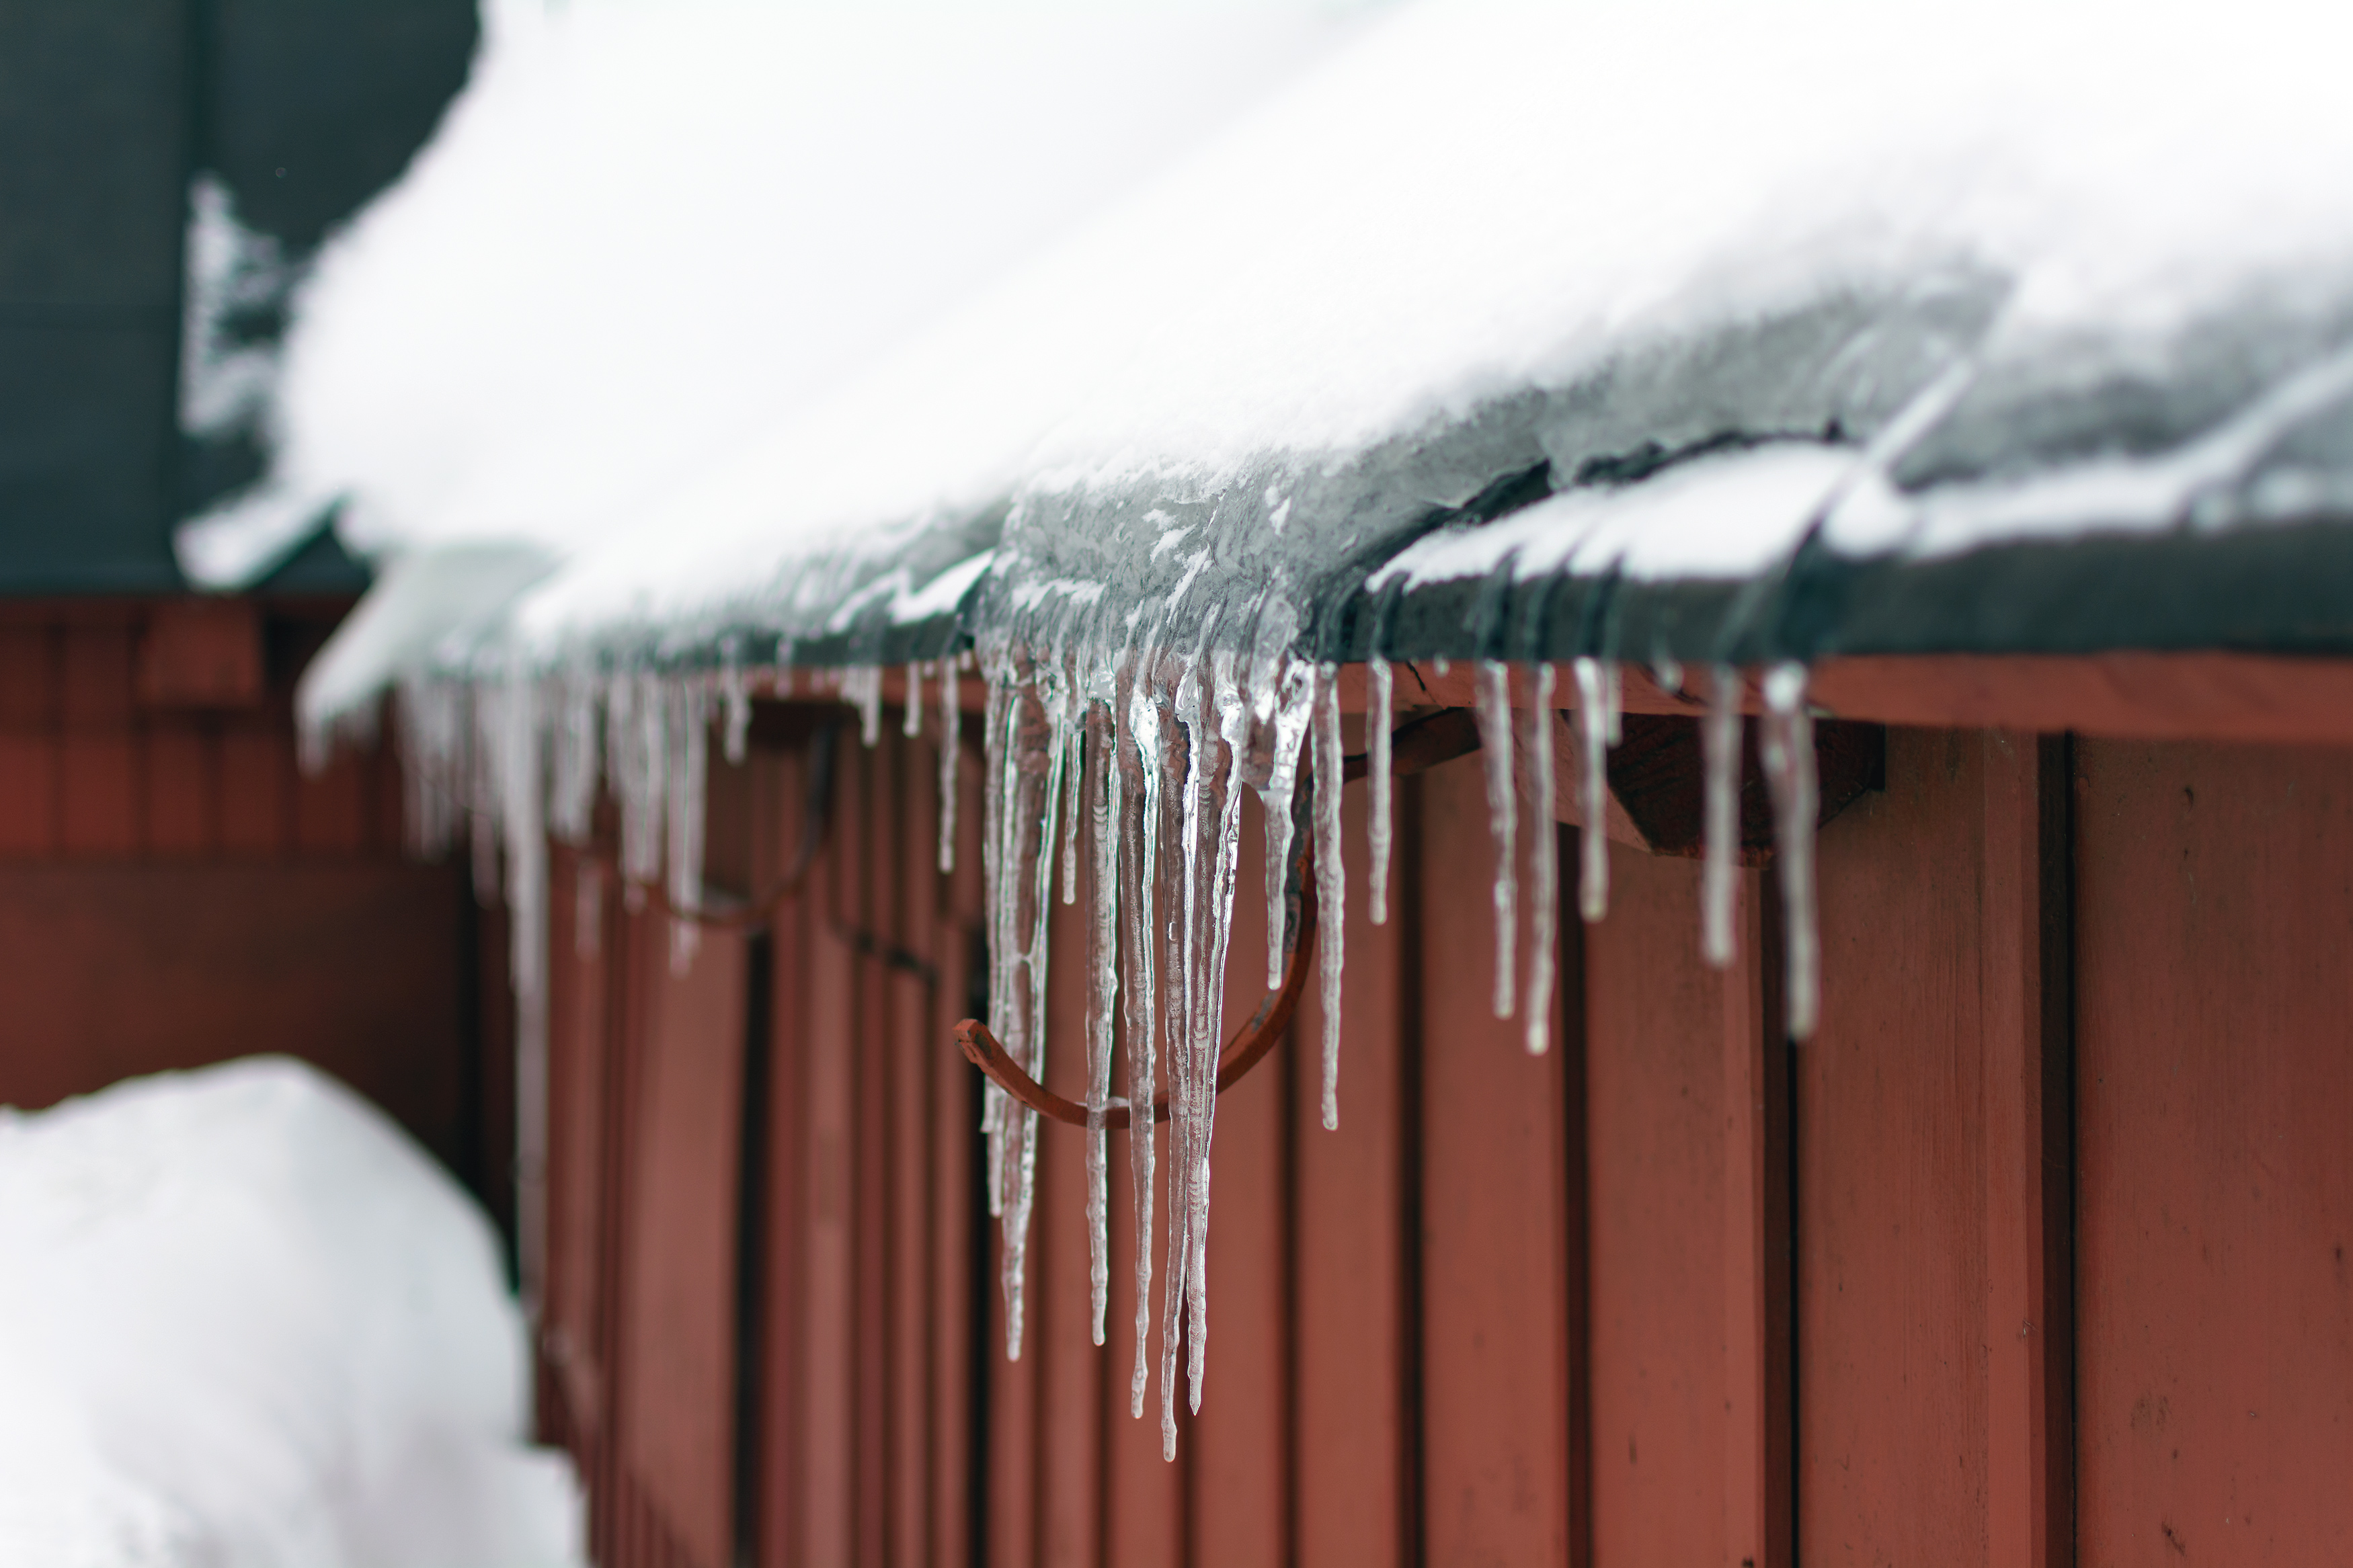 Free Image: Icicles on the Roof | Libreshot Public Domain Photos